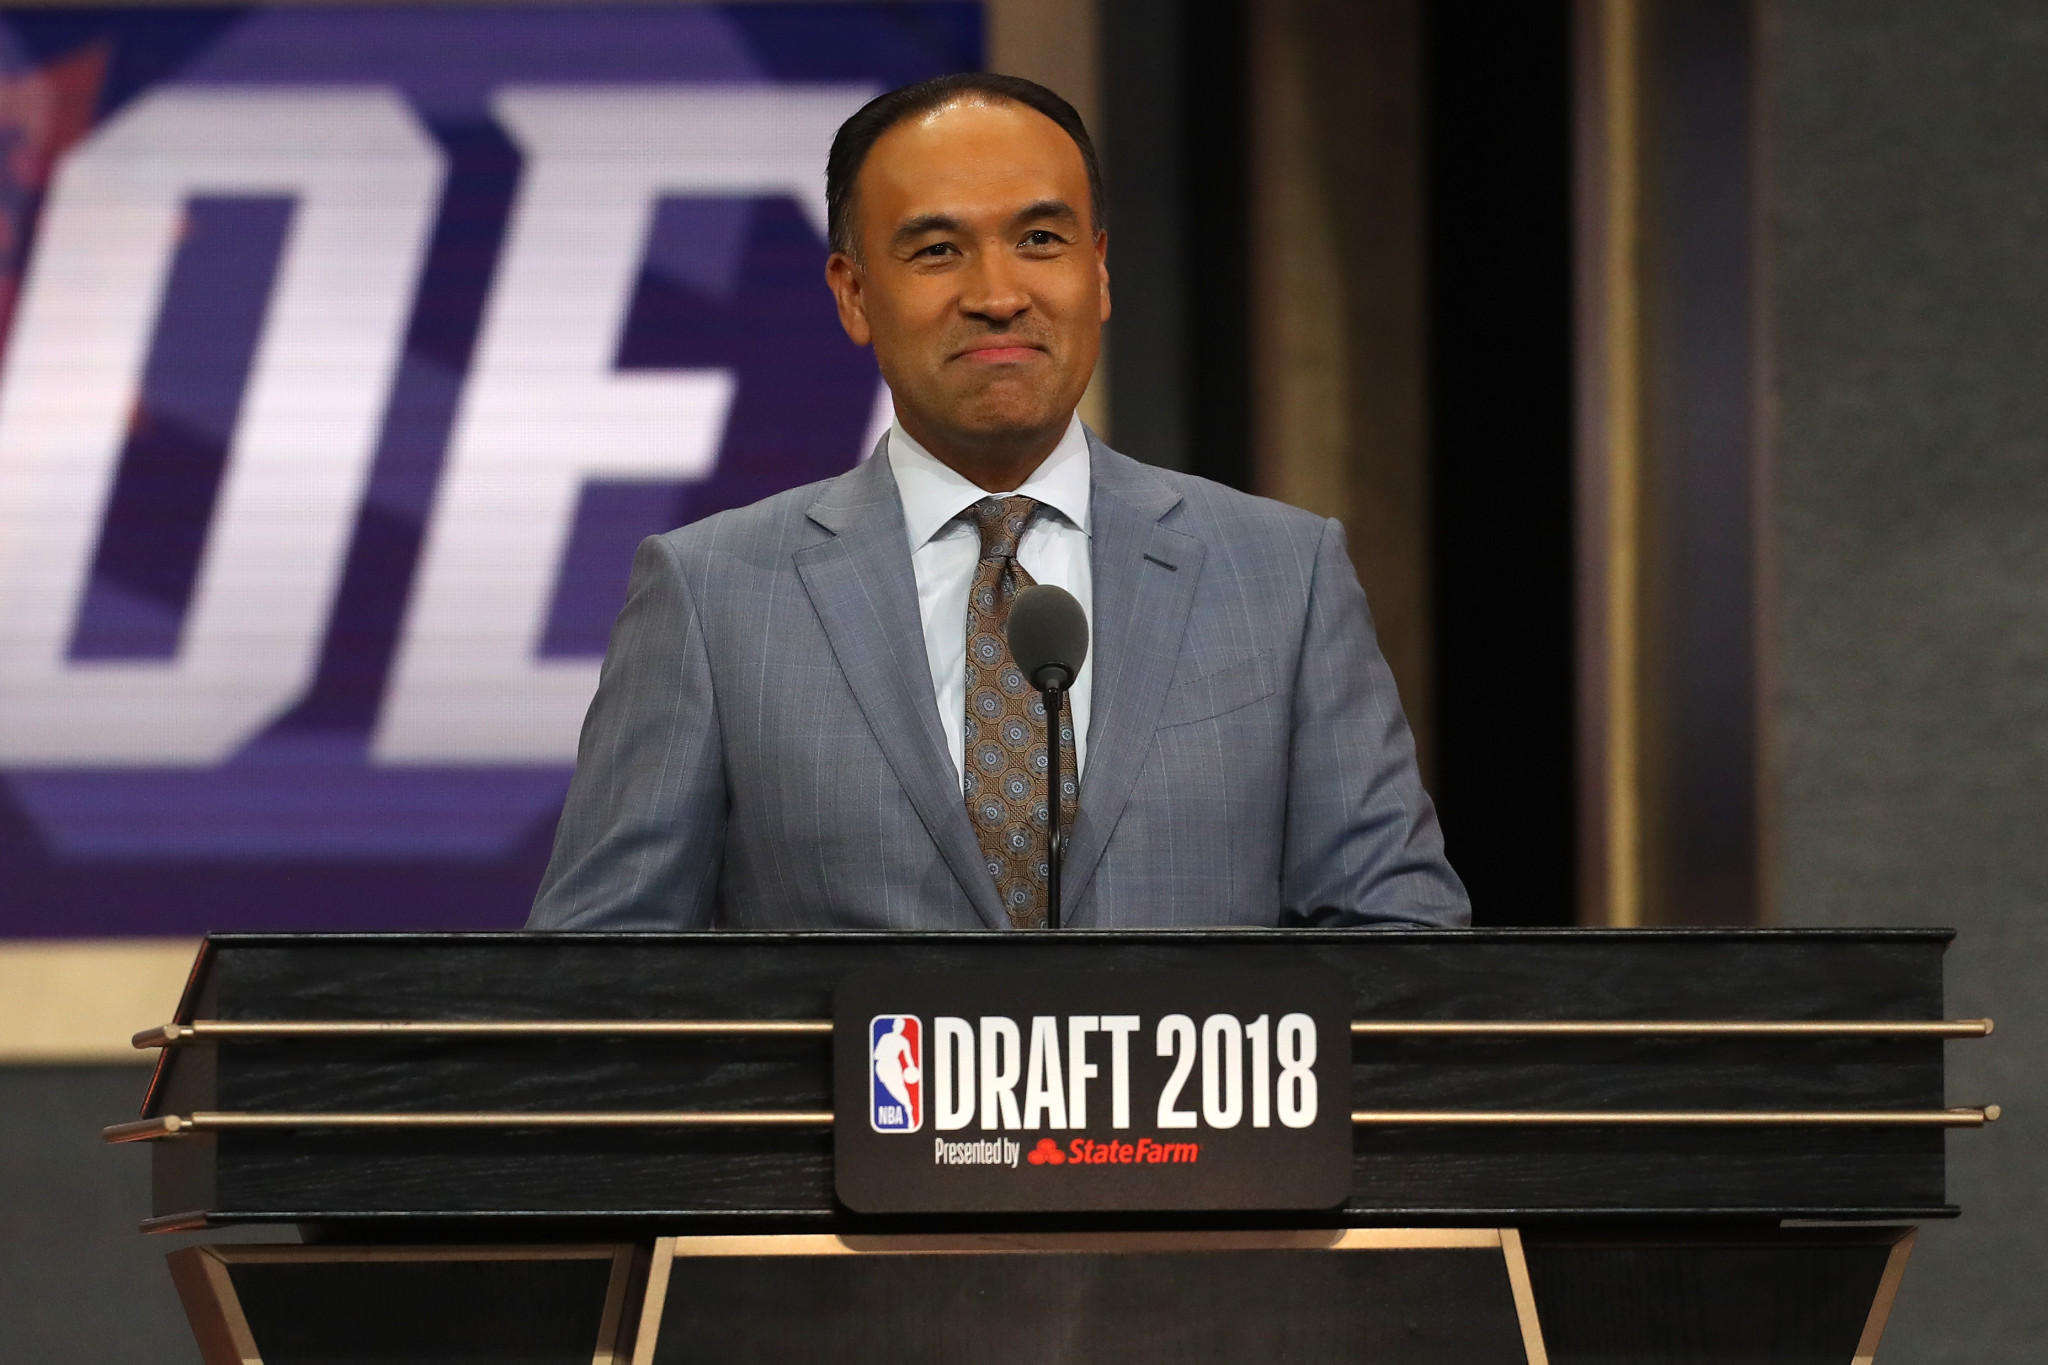 National Basketball Association deputy commissioner Mark Tatum was speaking at the FIBA World Basketball Summit in Xi'an in China ©Getty Images